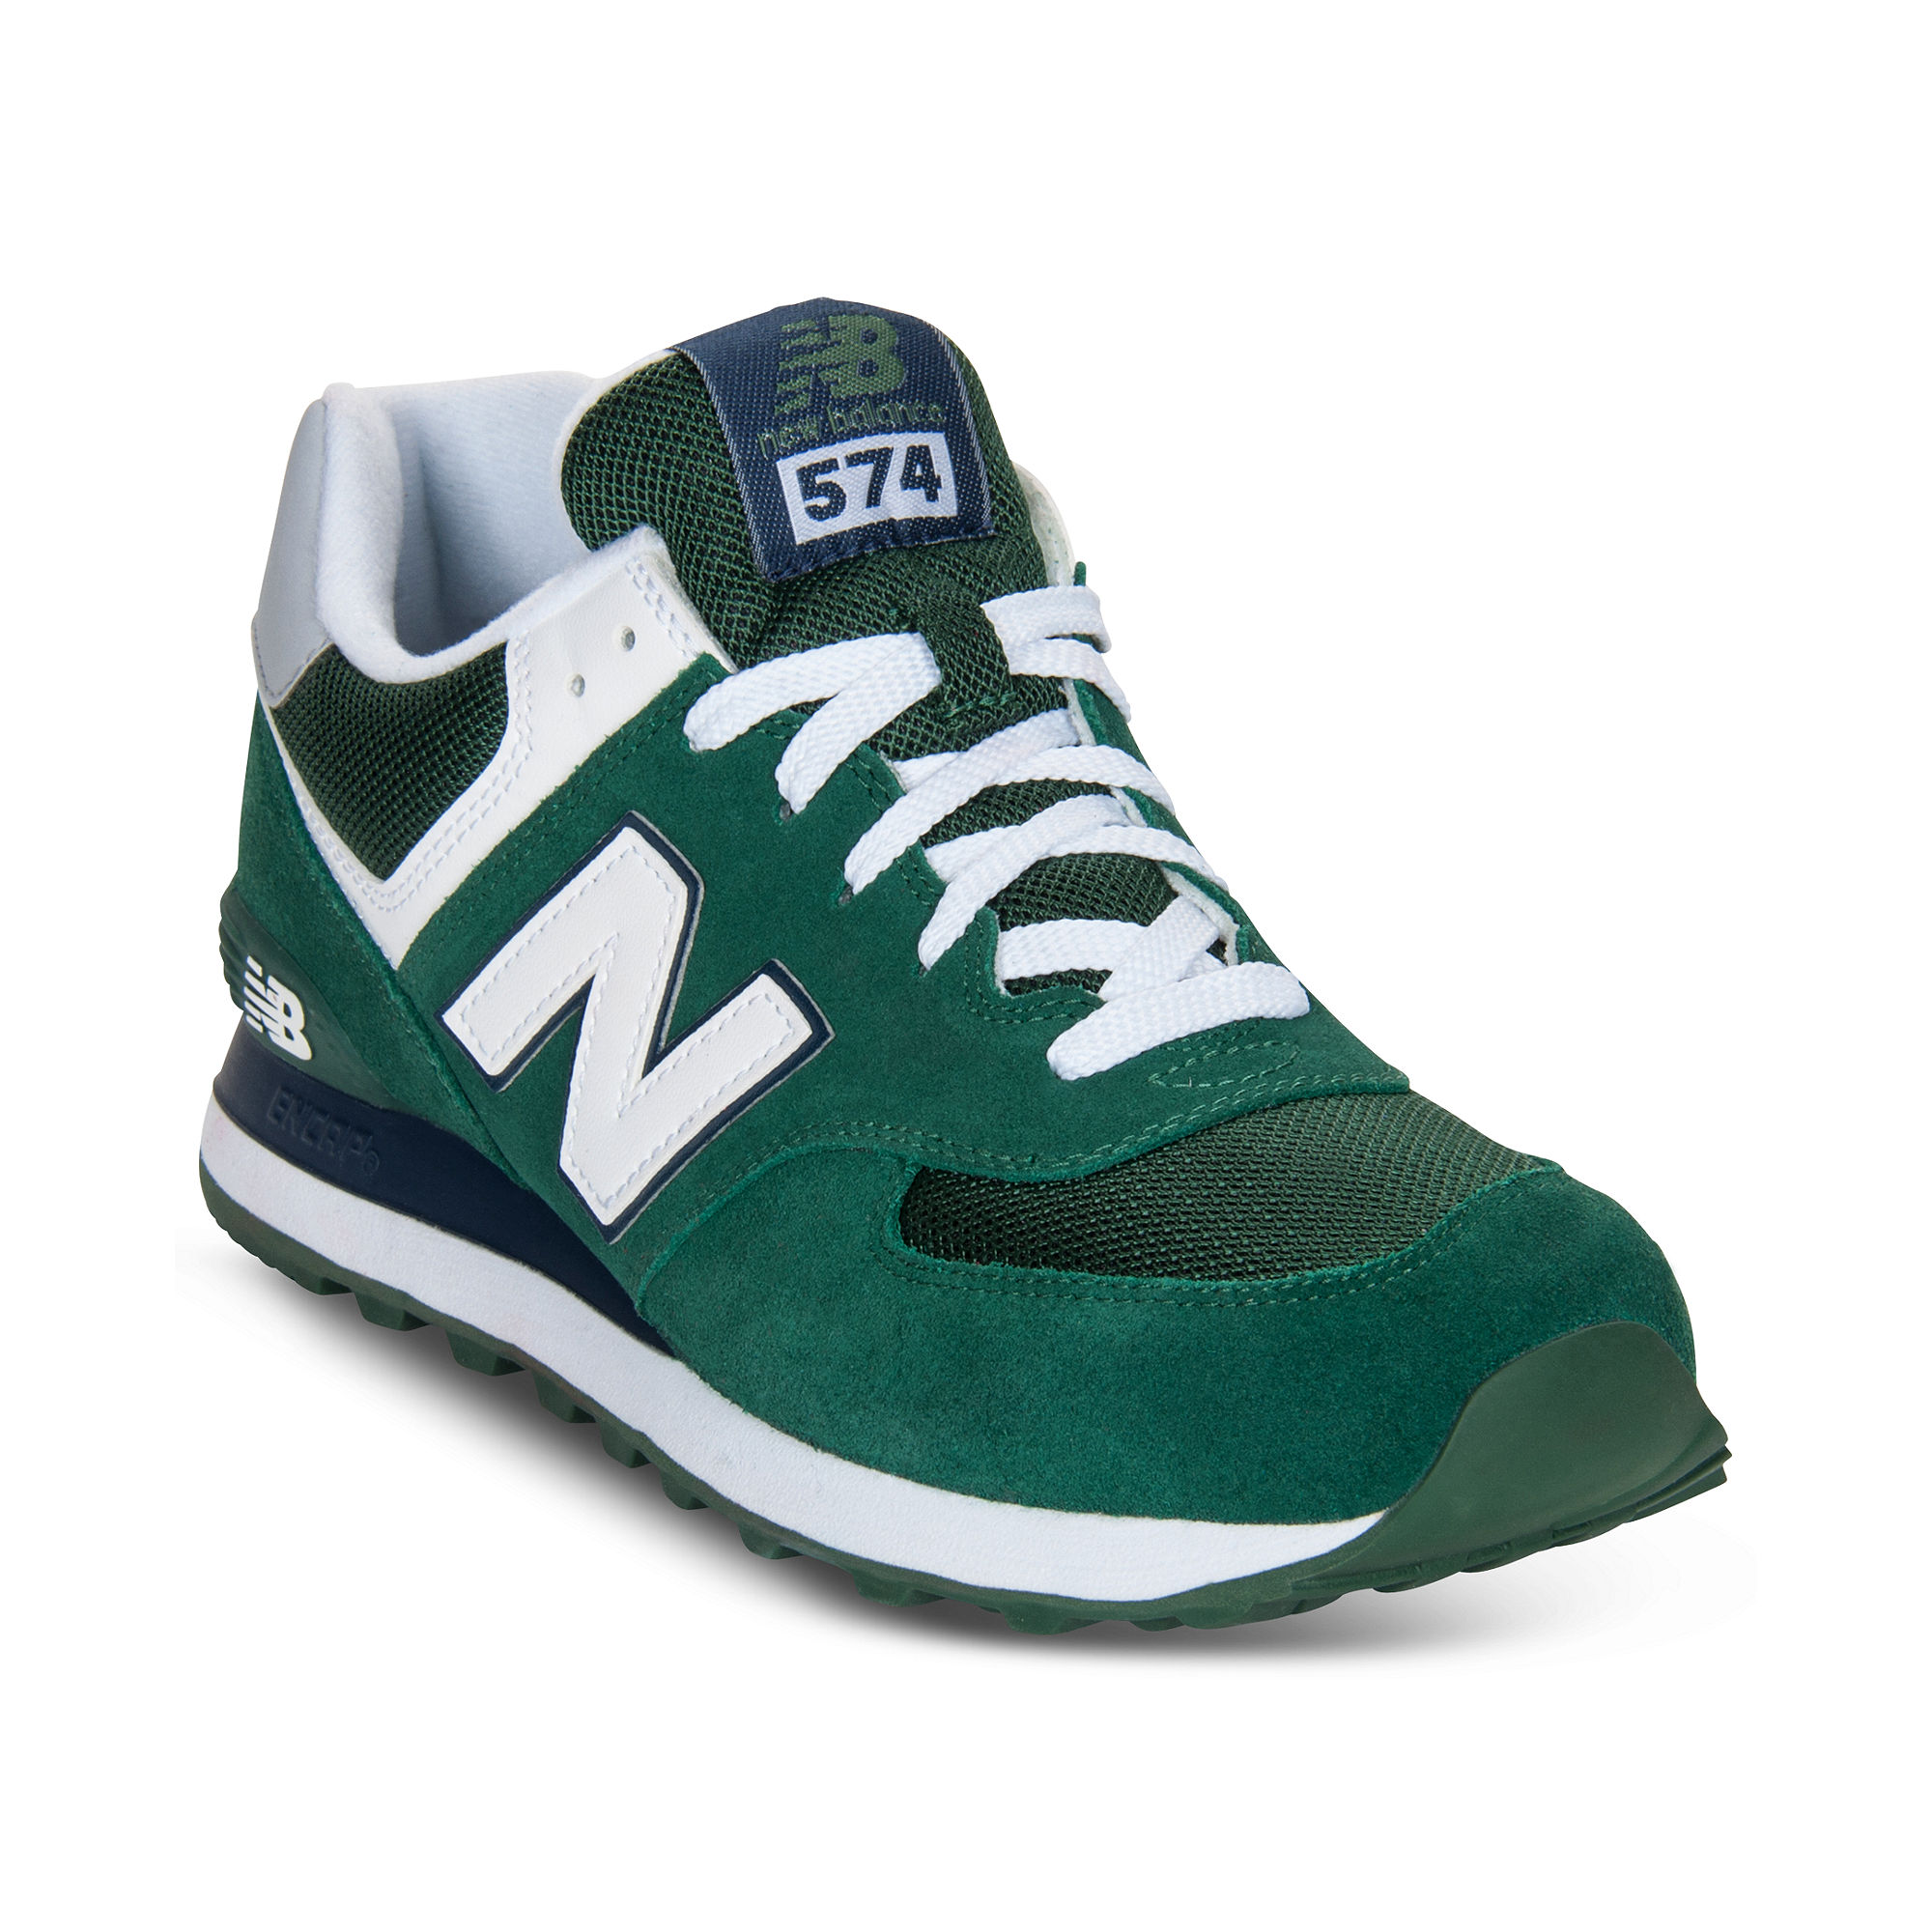 New Balance Sneakers in Green for Men - Lyst